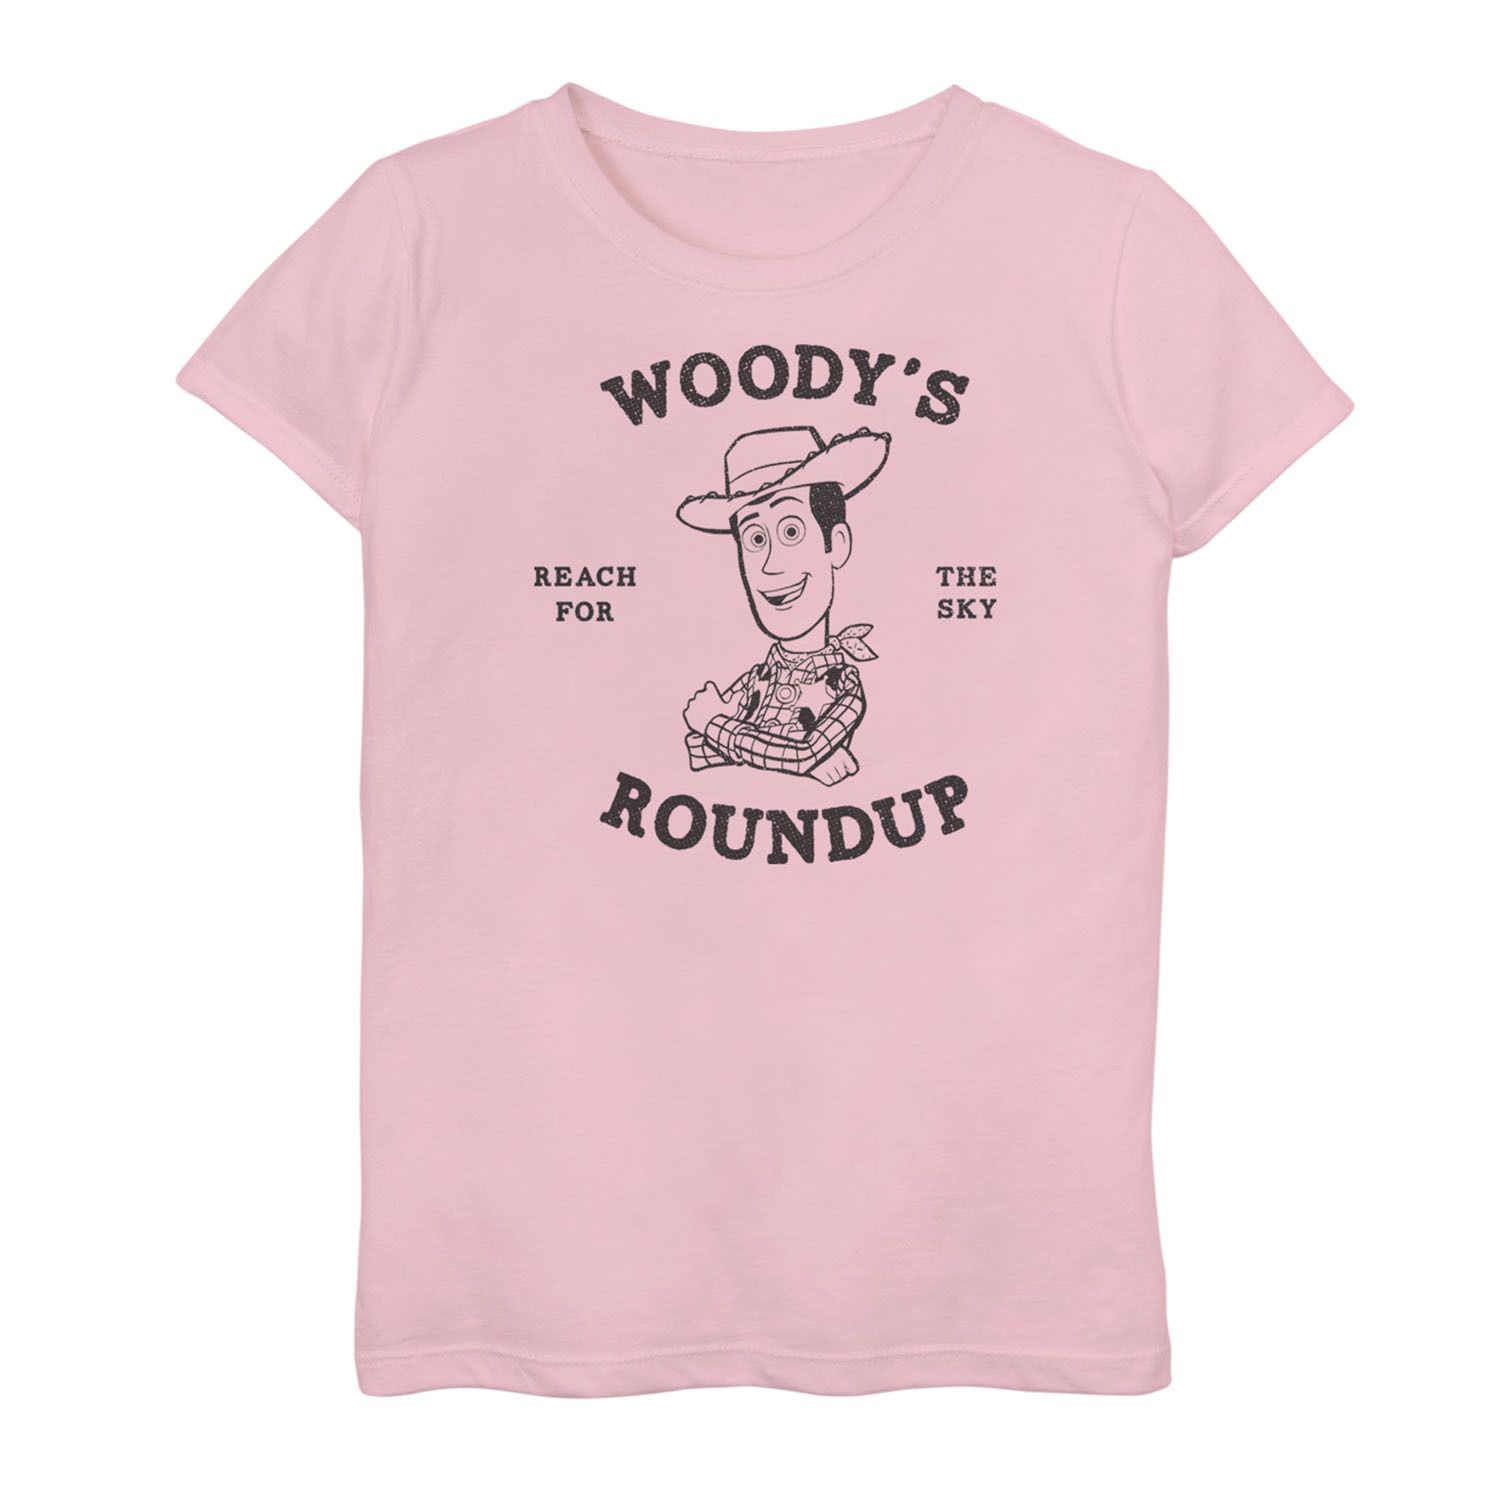 Image for Disney / Pixar Toy Story 4 Girls 7-16 Woody's Roundup Graphic Tee at Kohl's.